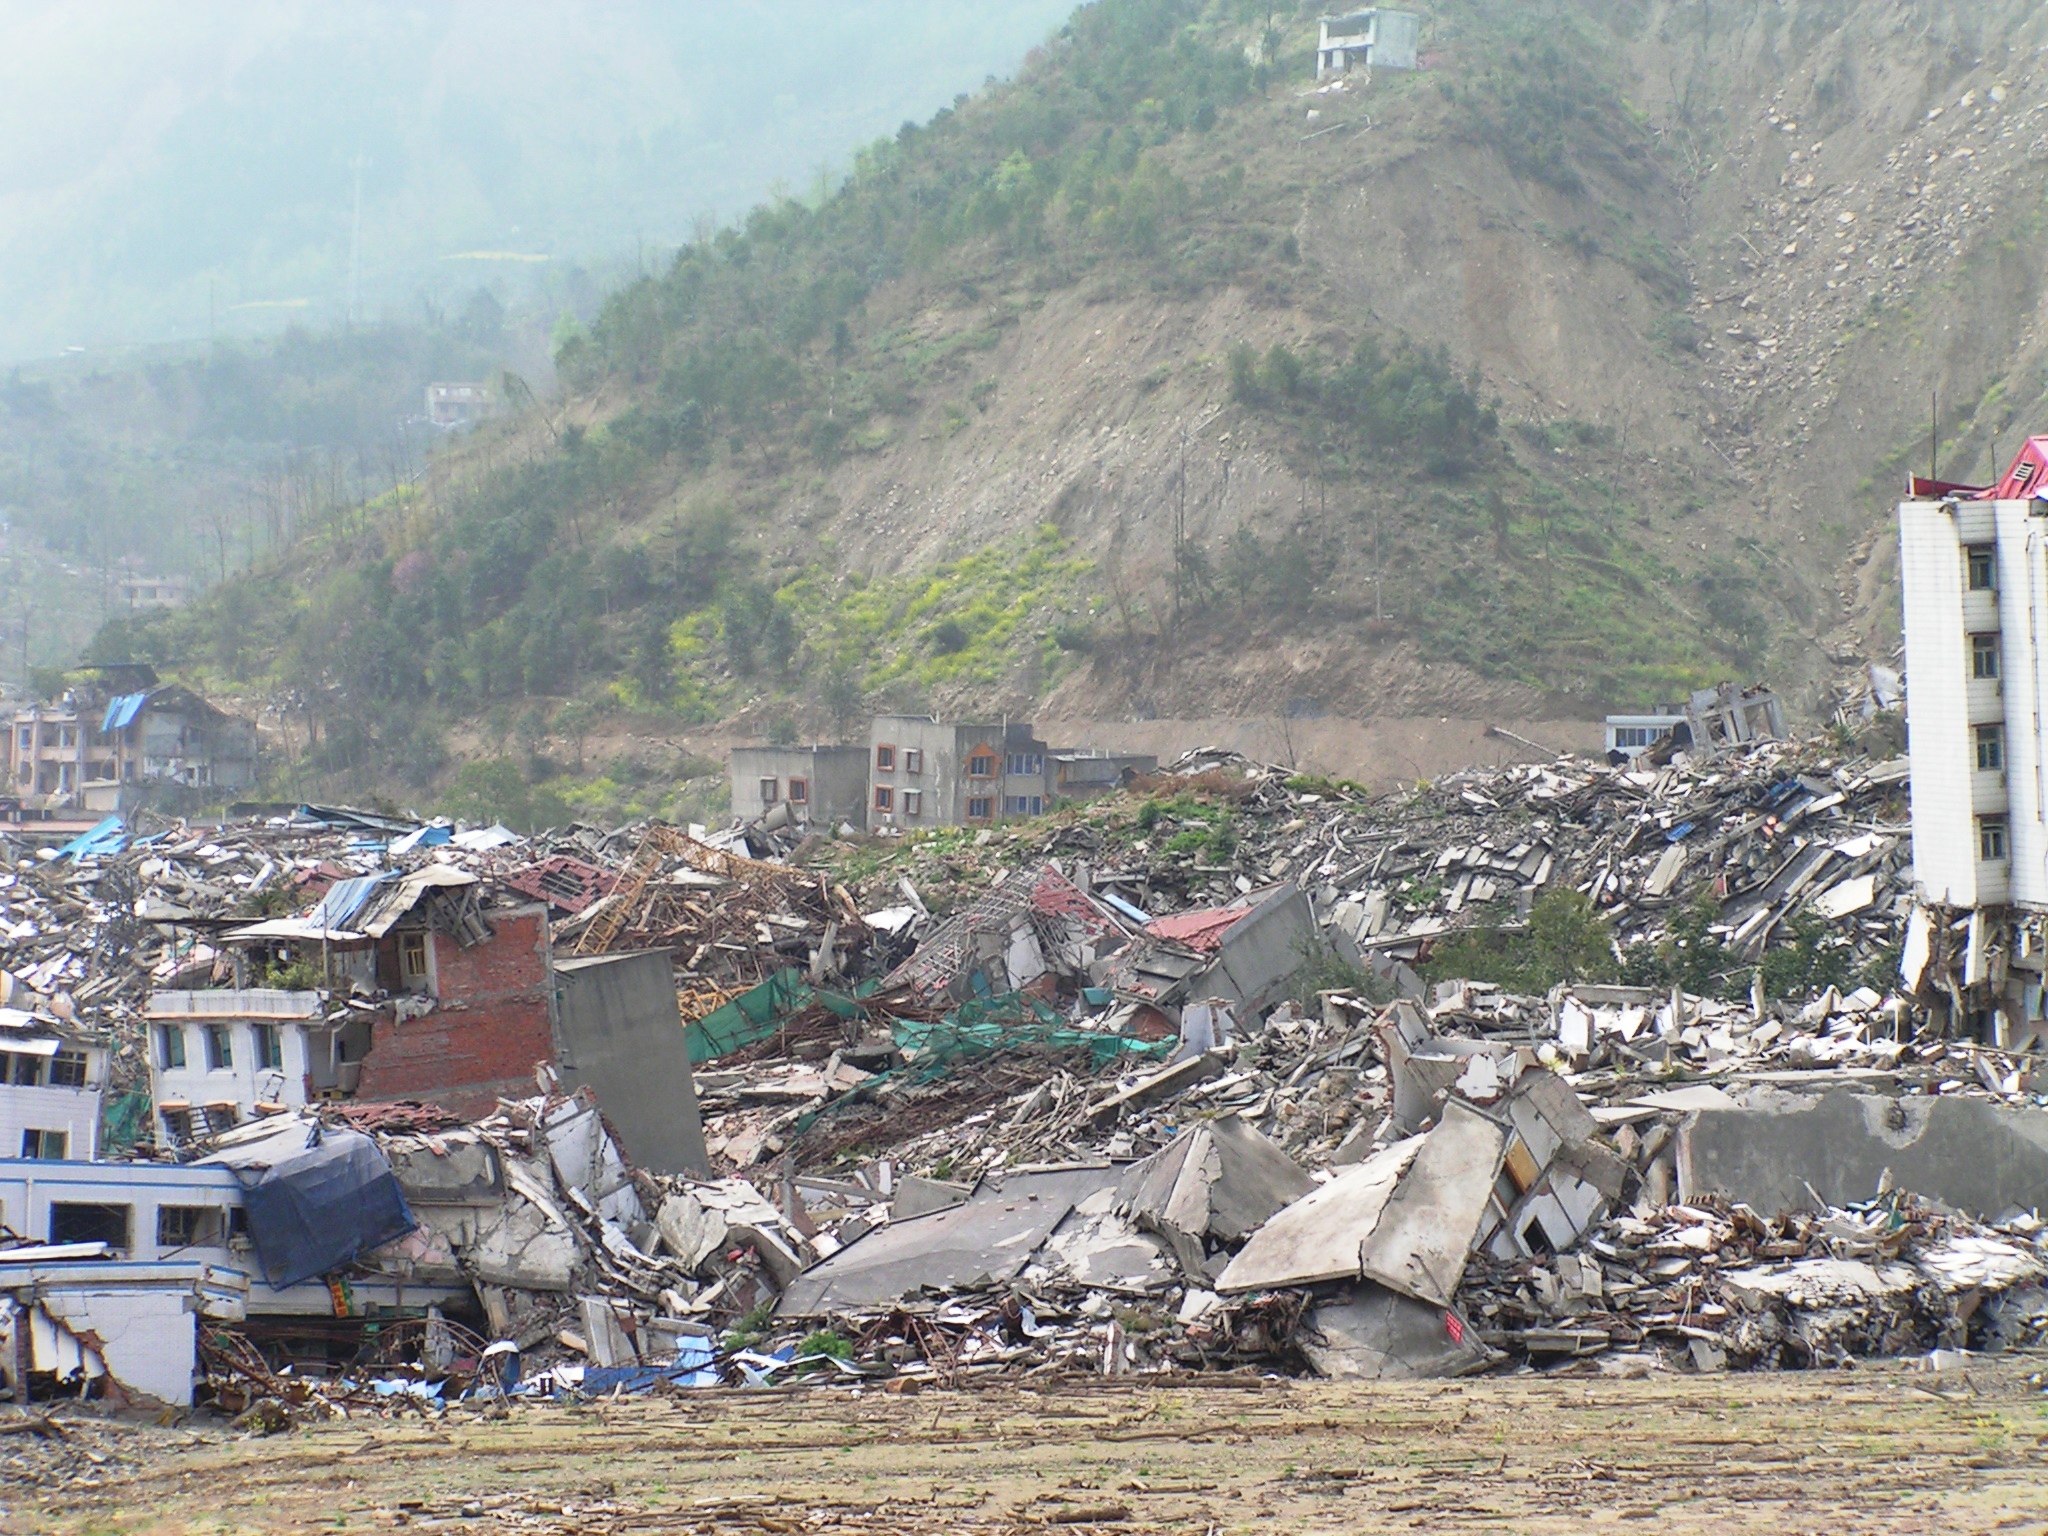 The effects of resettlement after disasters